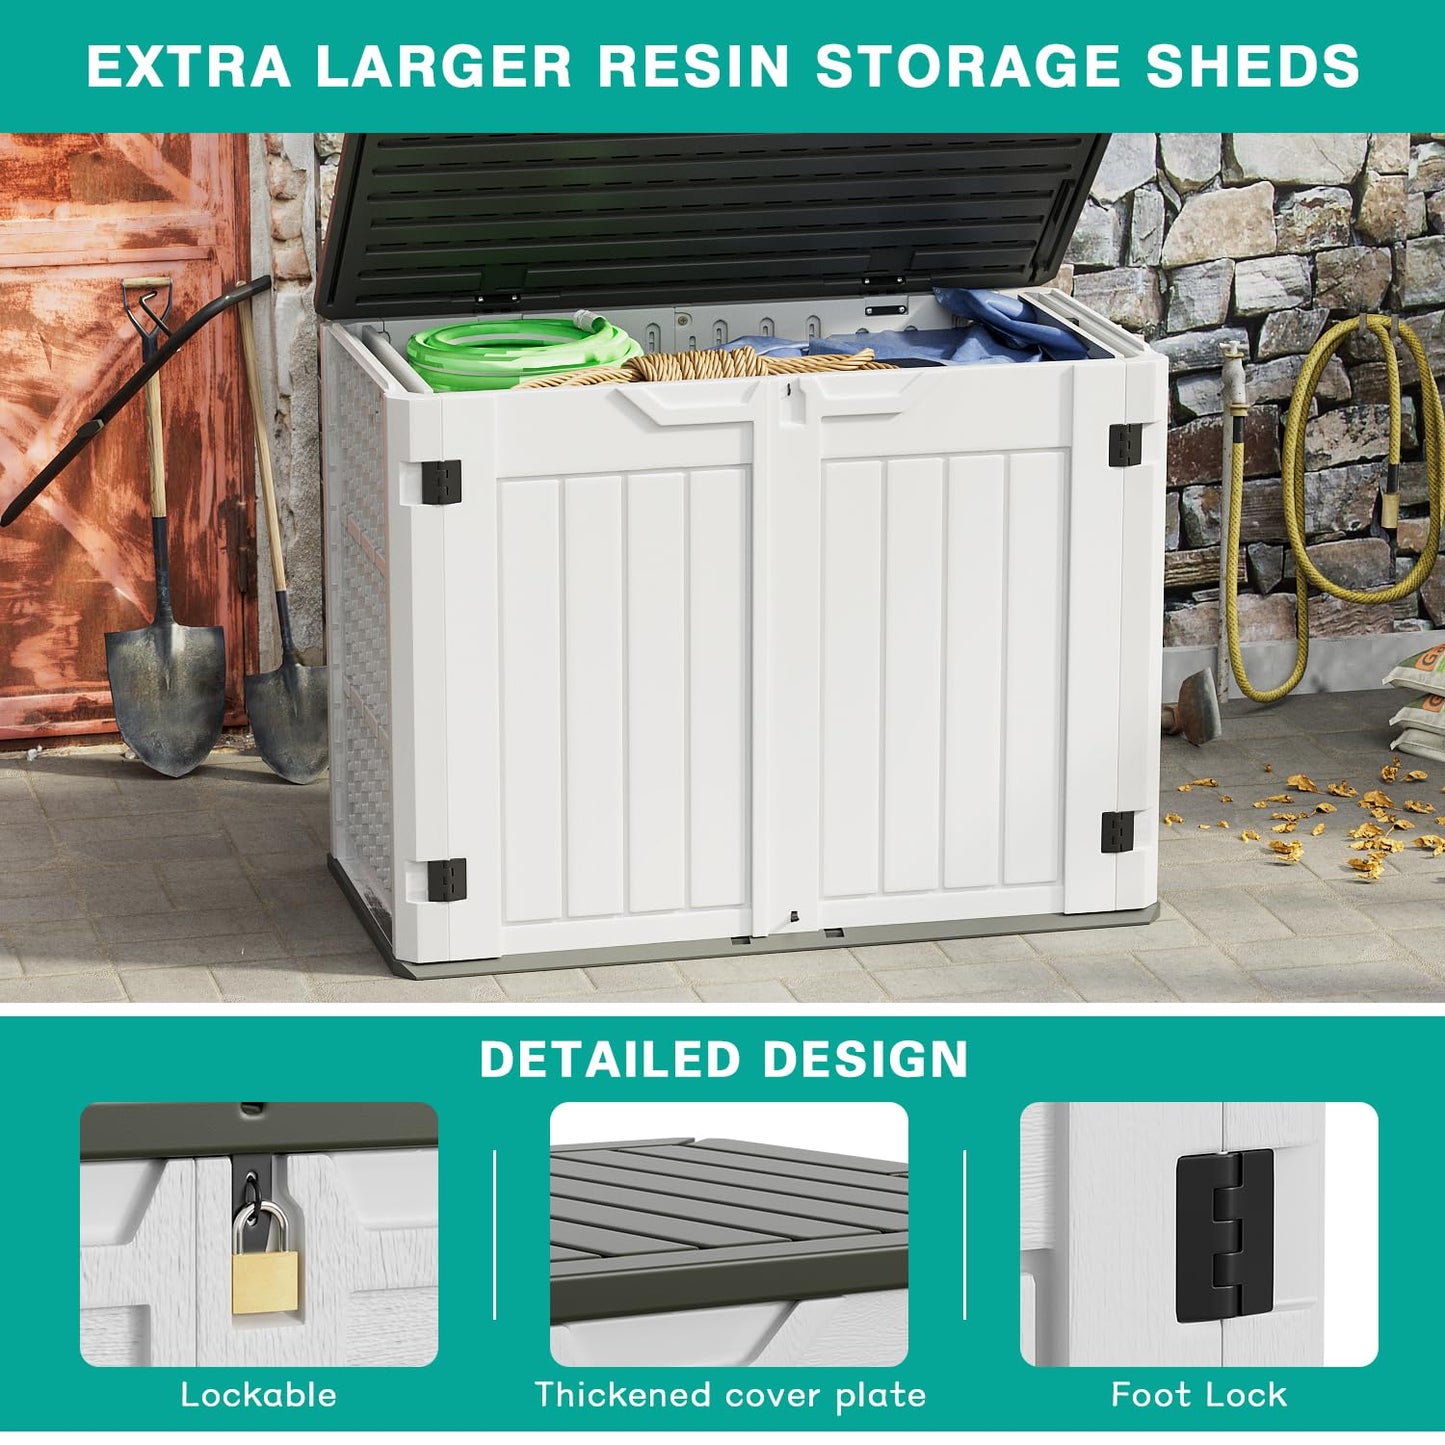 Greesum Outdoor Horizontal Resin Storage Sheds 34 Cu. Ft. Weather Resistant Resin Tool Shed, Extra Large Capacity Weather Resistant Box for Bike,